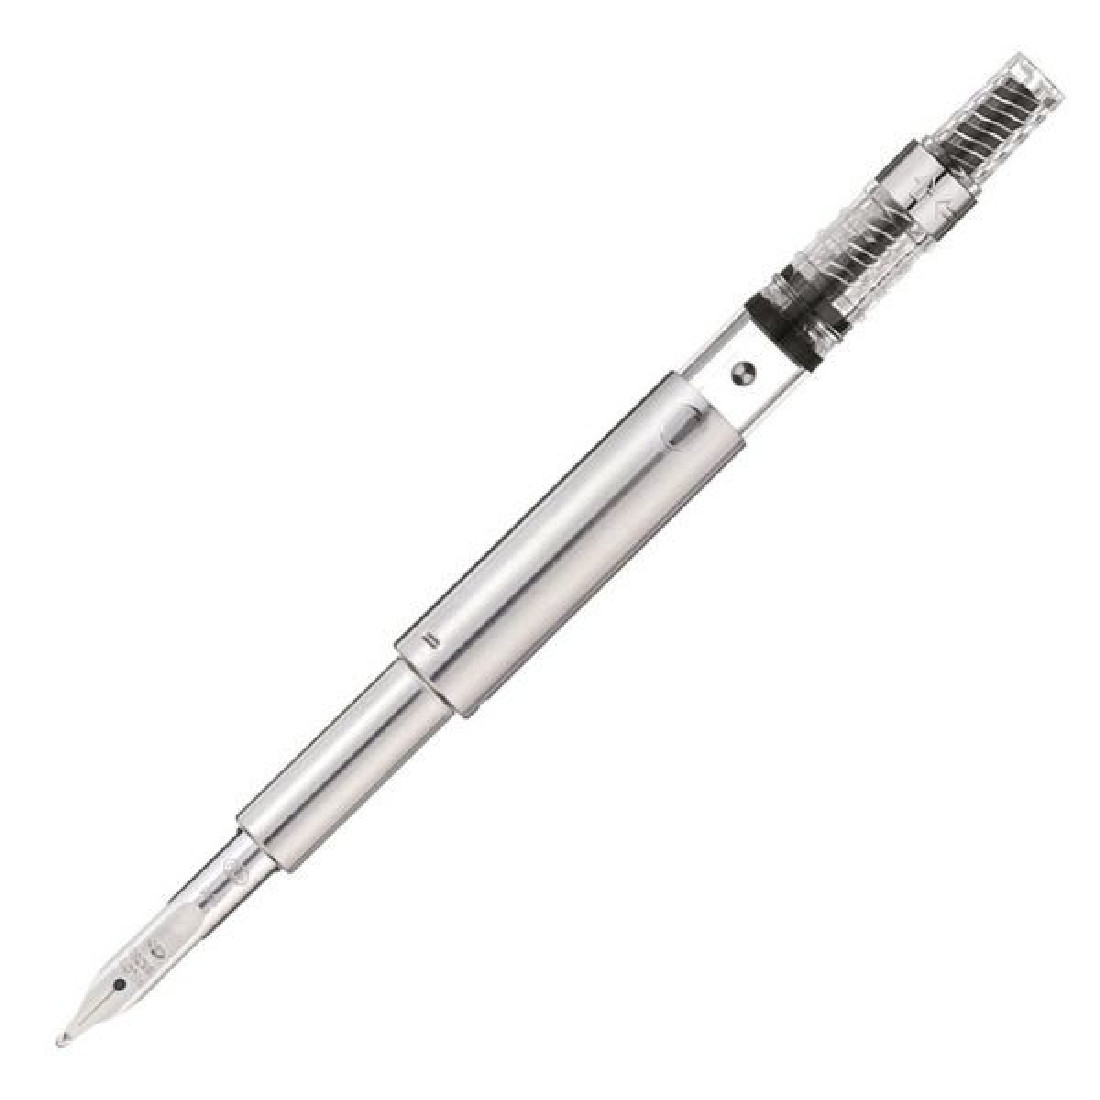 Pilot spare nib 18k for capless (vanishing point) series with con-40 converter  FC-1500RR